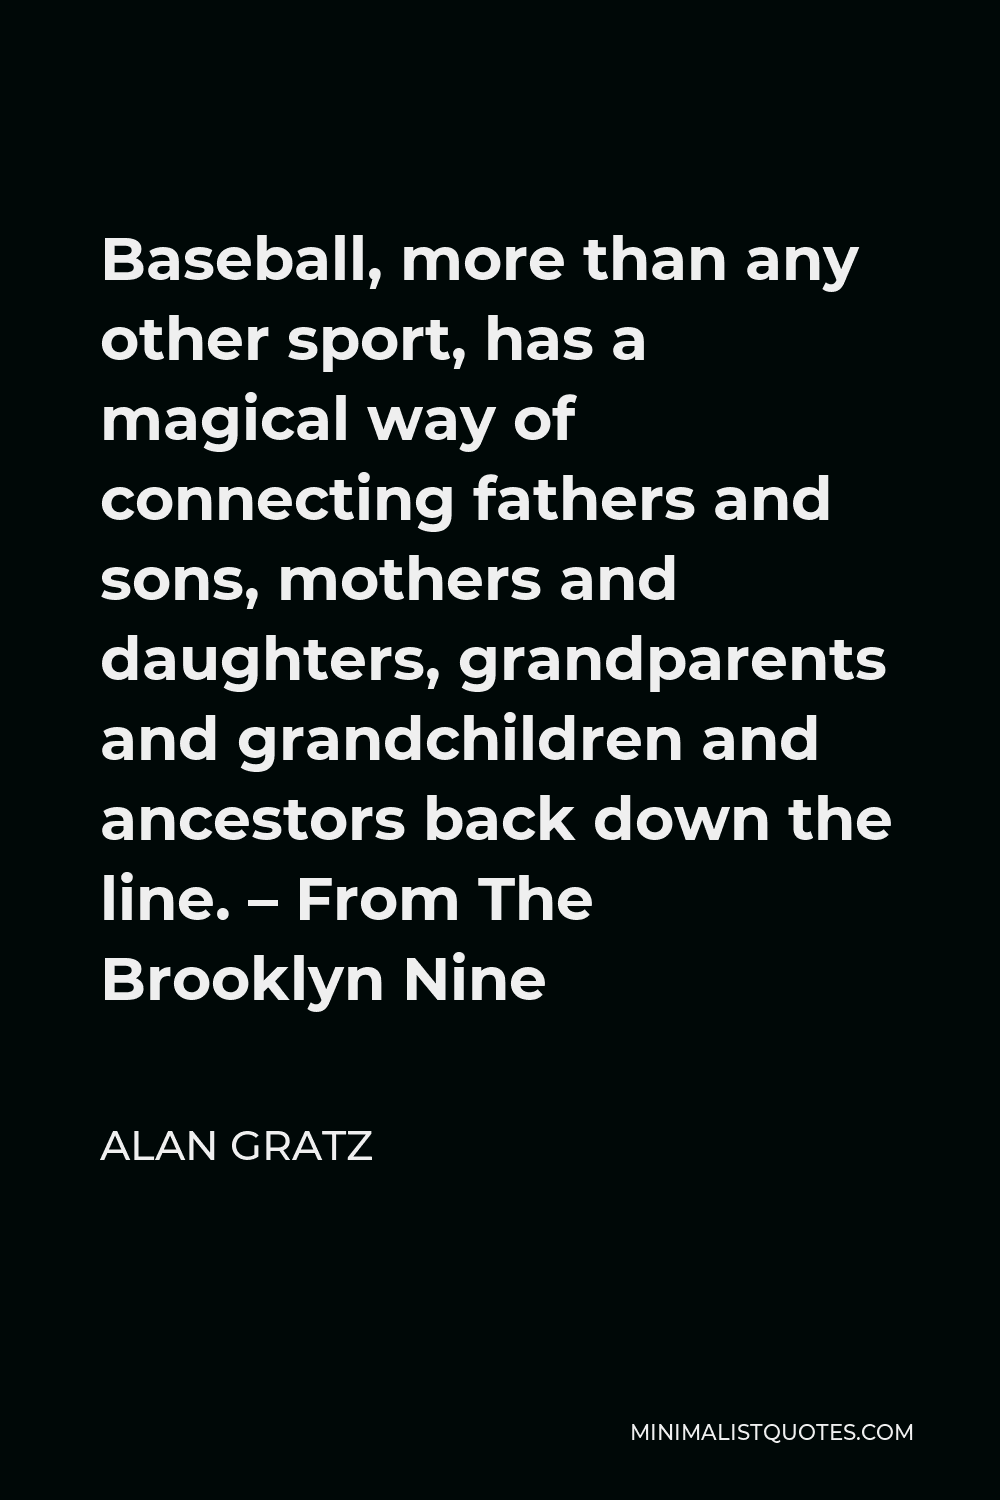 Alan Gratz Quote - Baseball, more than any other sport, has a magical way of connecting fathers and sons, mothers and daughters, grandparents and grandchildren and ancestors back down the line. – From The Brooklyn Nine